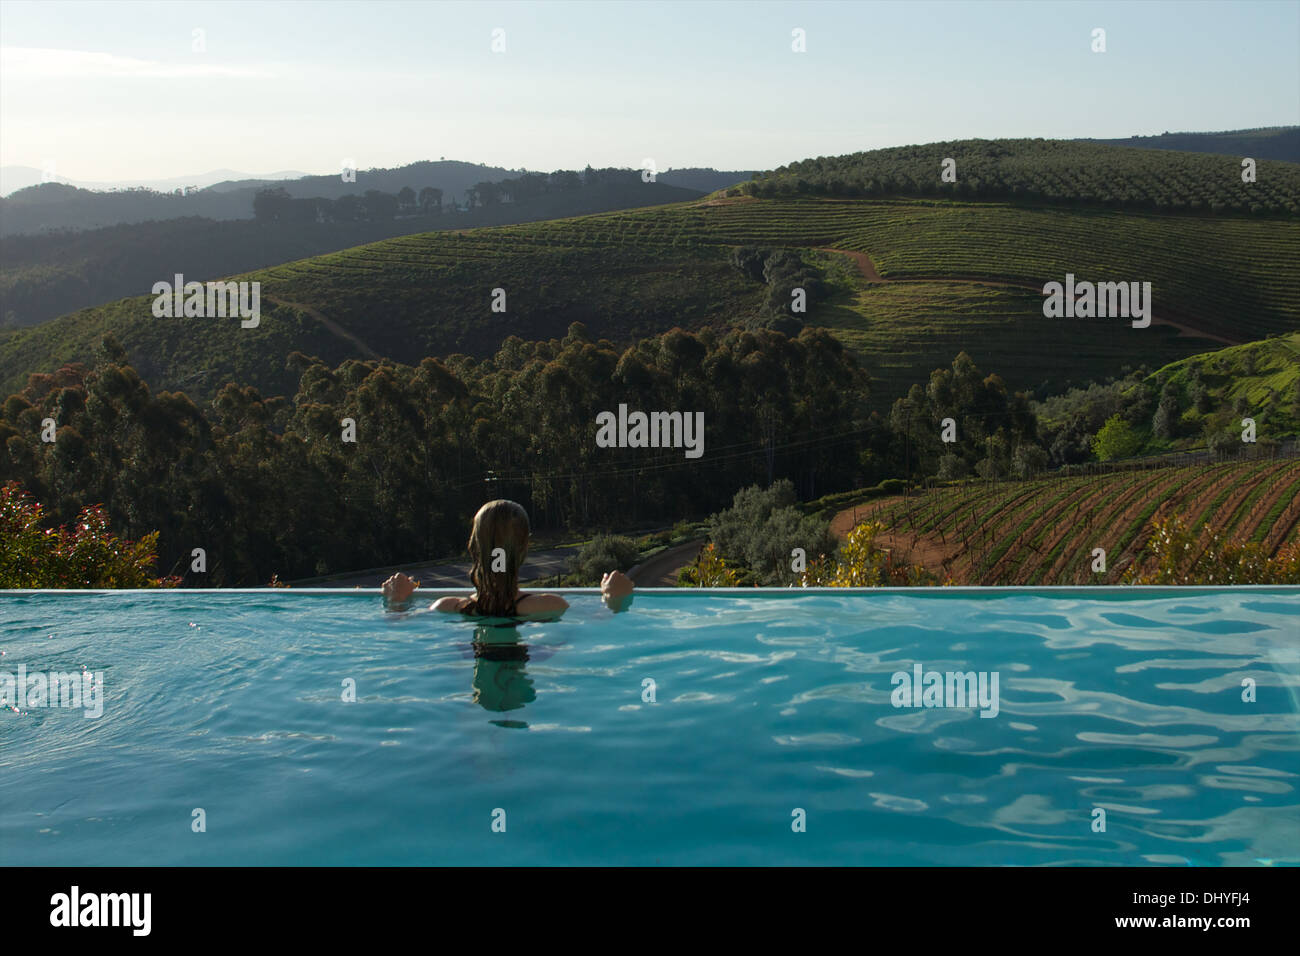 A women enjoys the view over the Stellenbosch winelands from an infinity pool in South Africa. Stock Photo